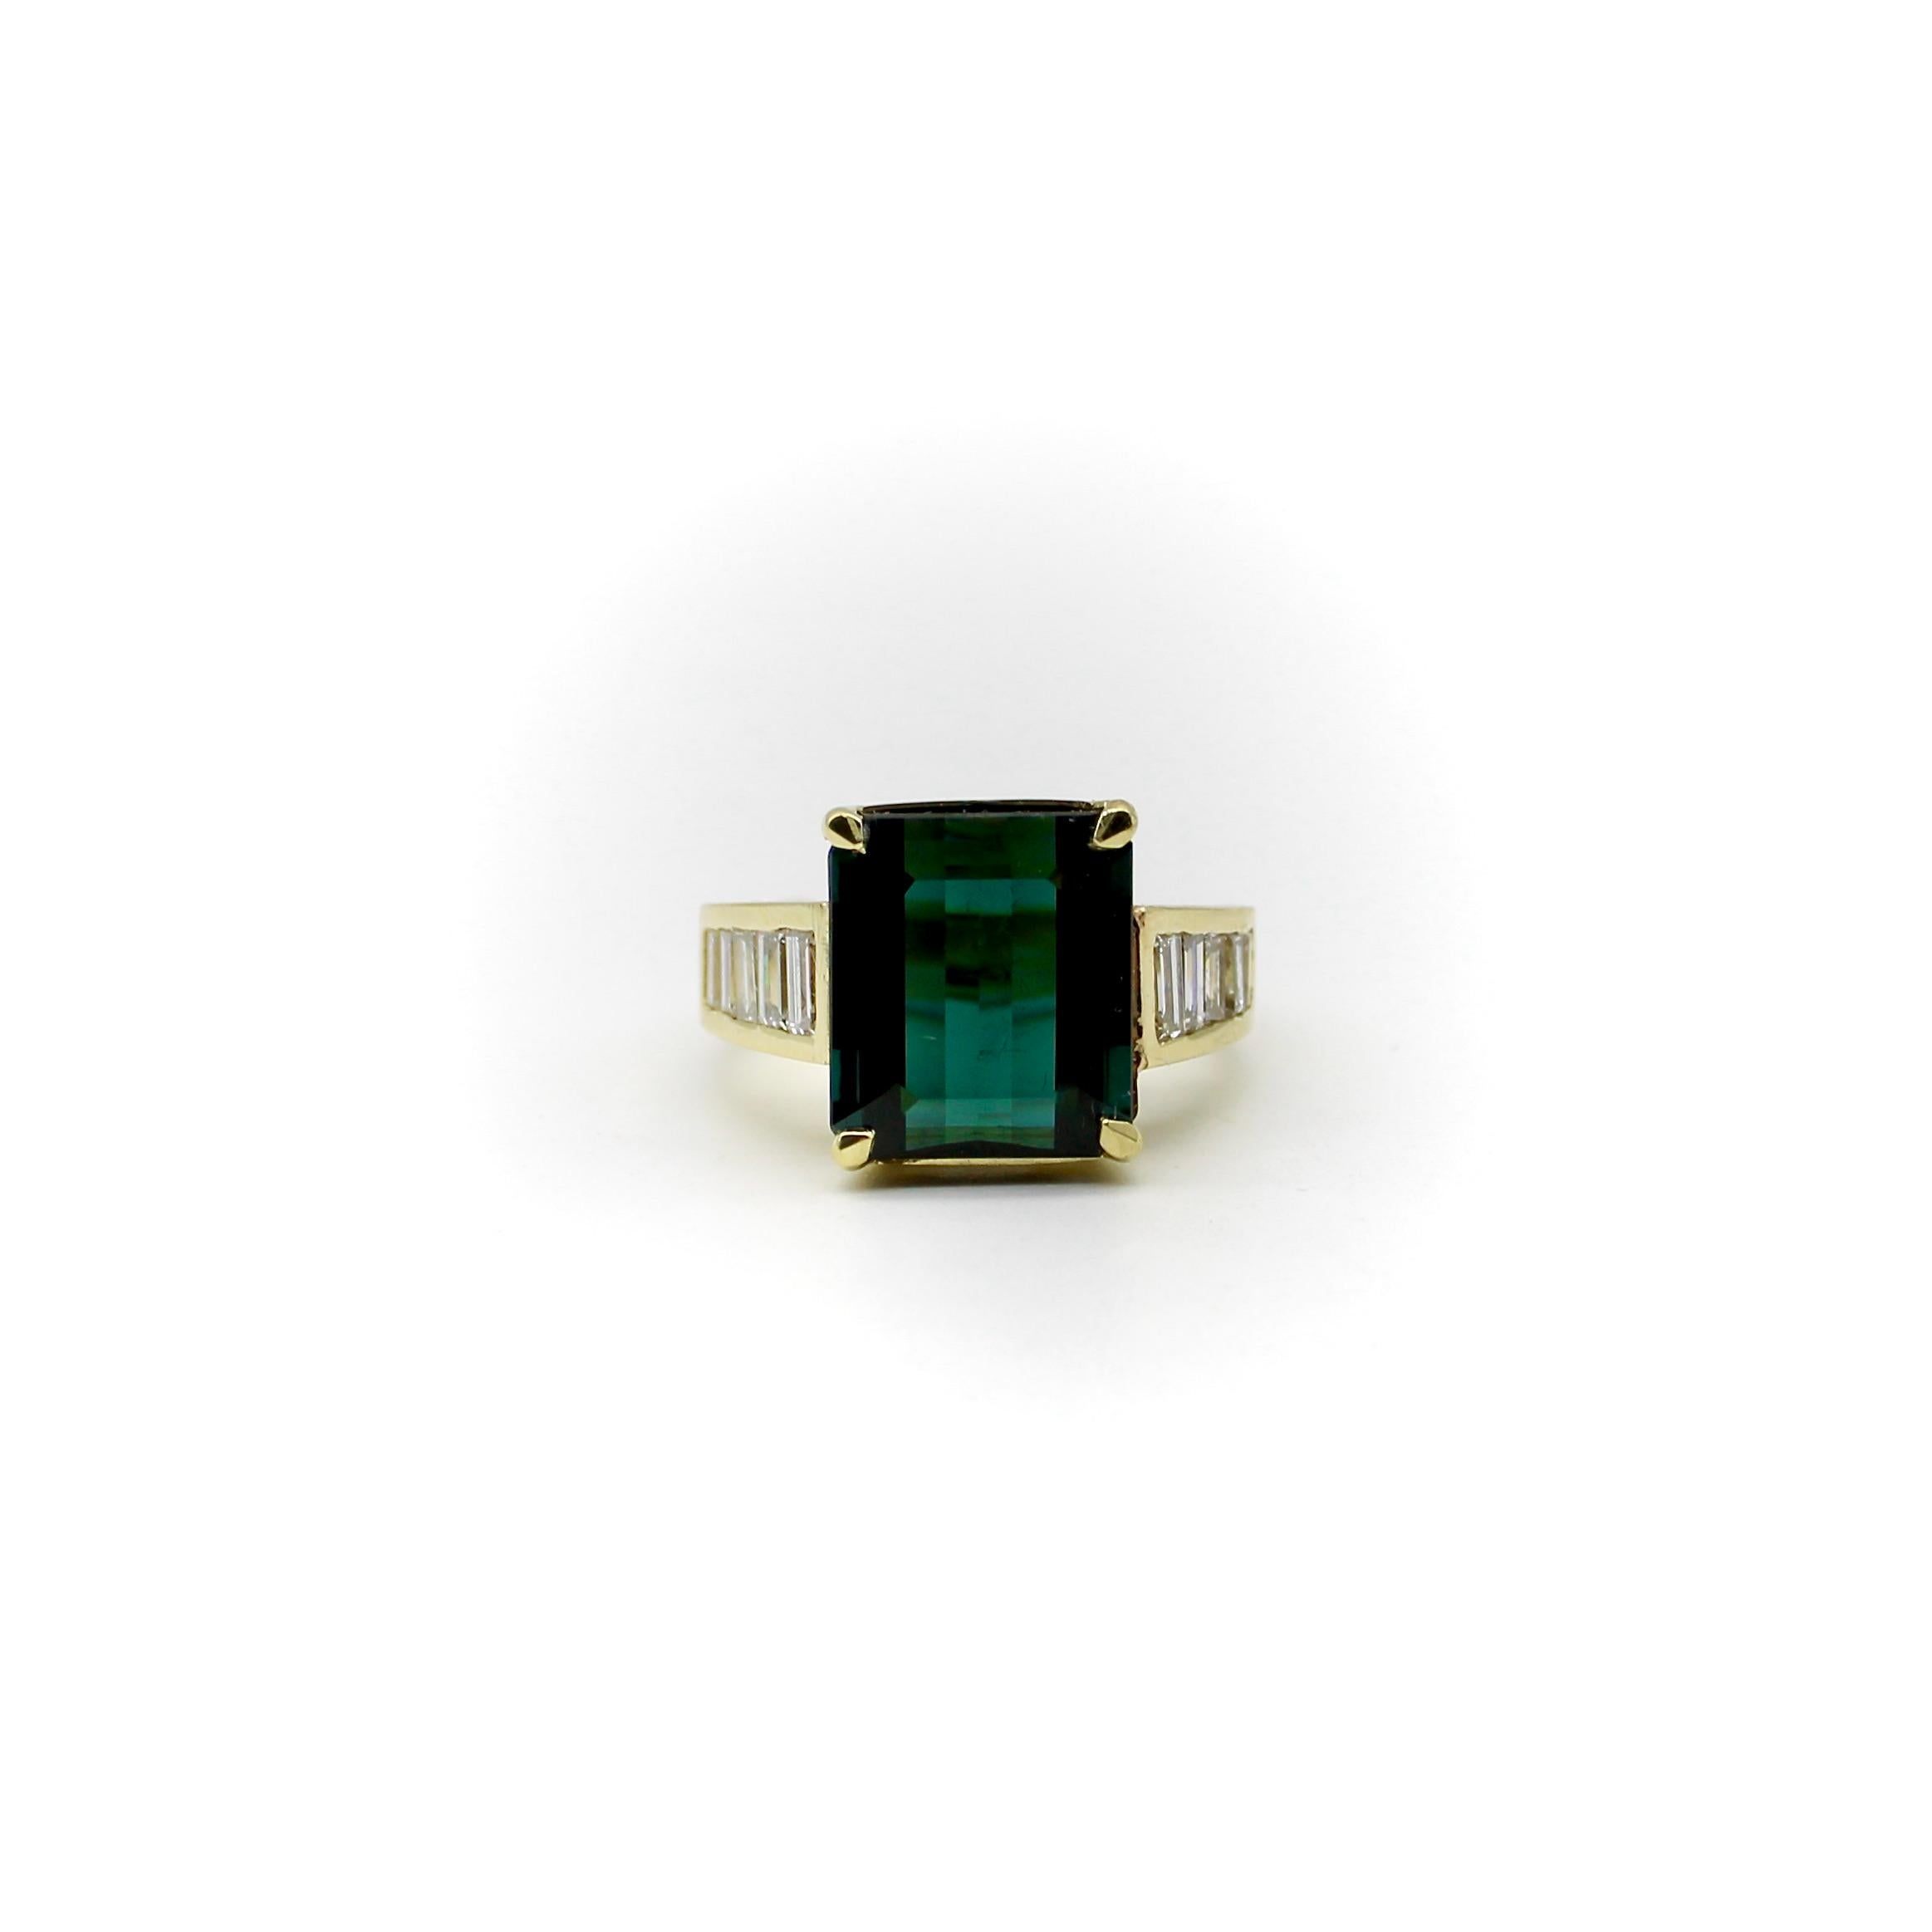 This gorgeous 14k gold cocktail ring features a deeply saturated blue-green Indicolite Tourmaline, with rows of channel set baguette diamonds down each side of the ring. The rectangular gemstone is large, with a stunning presence on the hand, and is